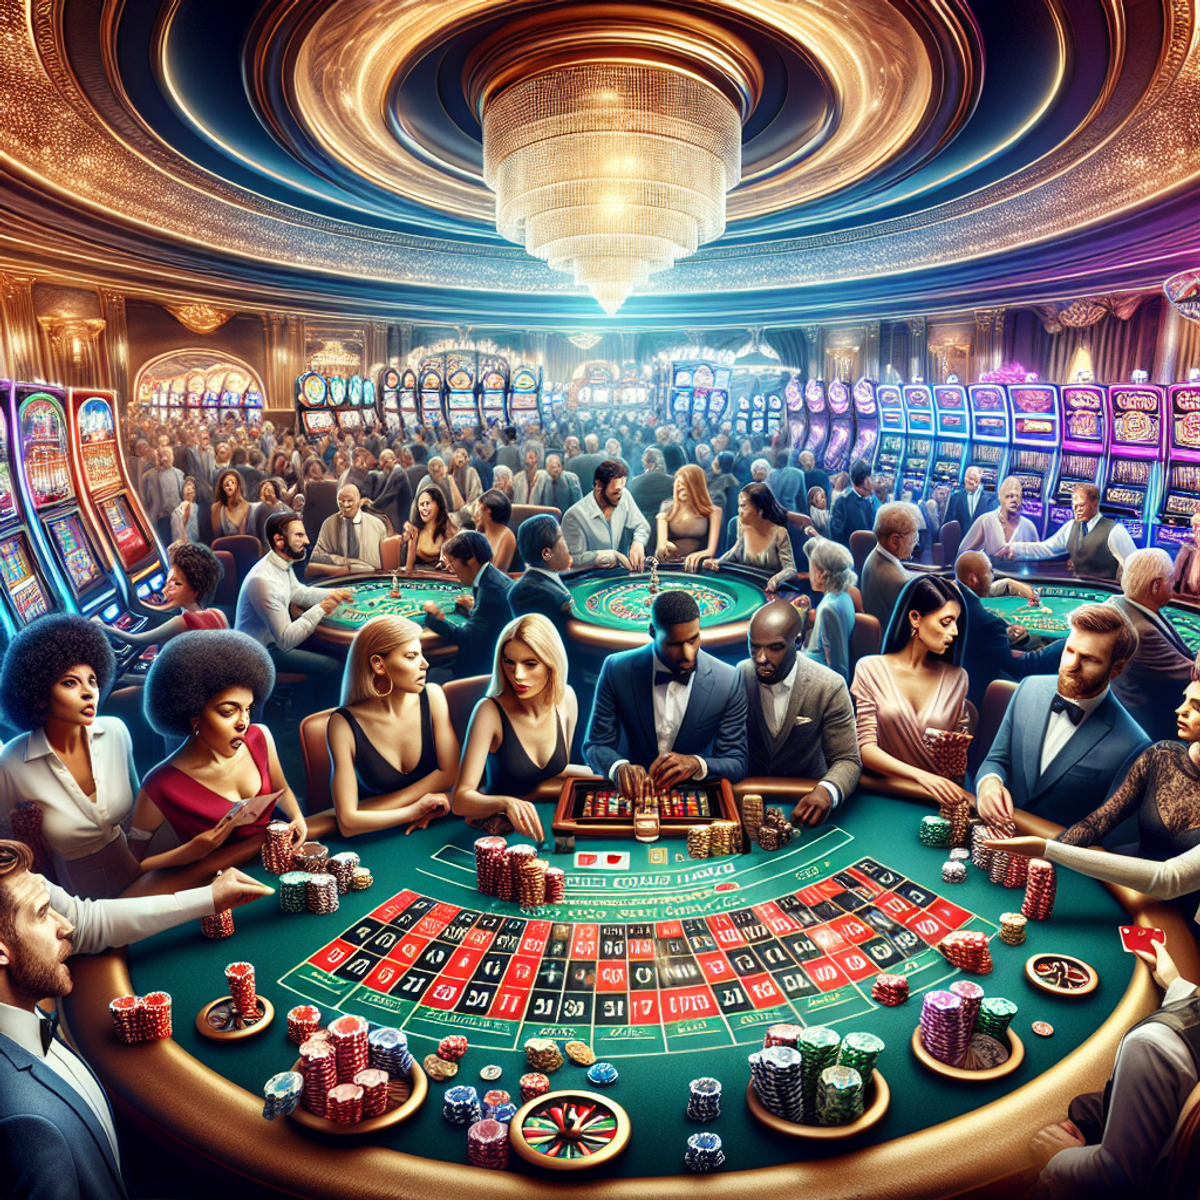 A bustling casino floor with diverse players engaged in various games like roulette, slot machines, poker, and blackjack. Excitement fills the air as players immerse themselves in the vibrant atmosphere.